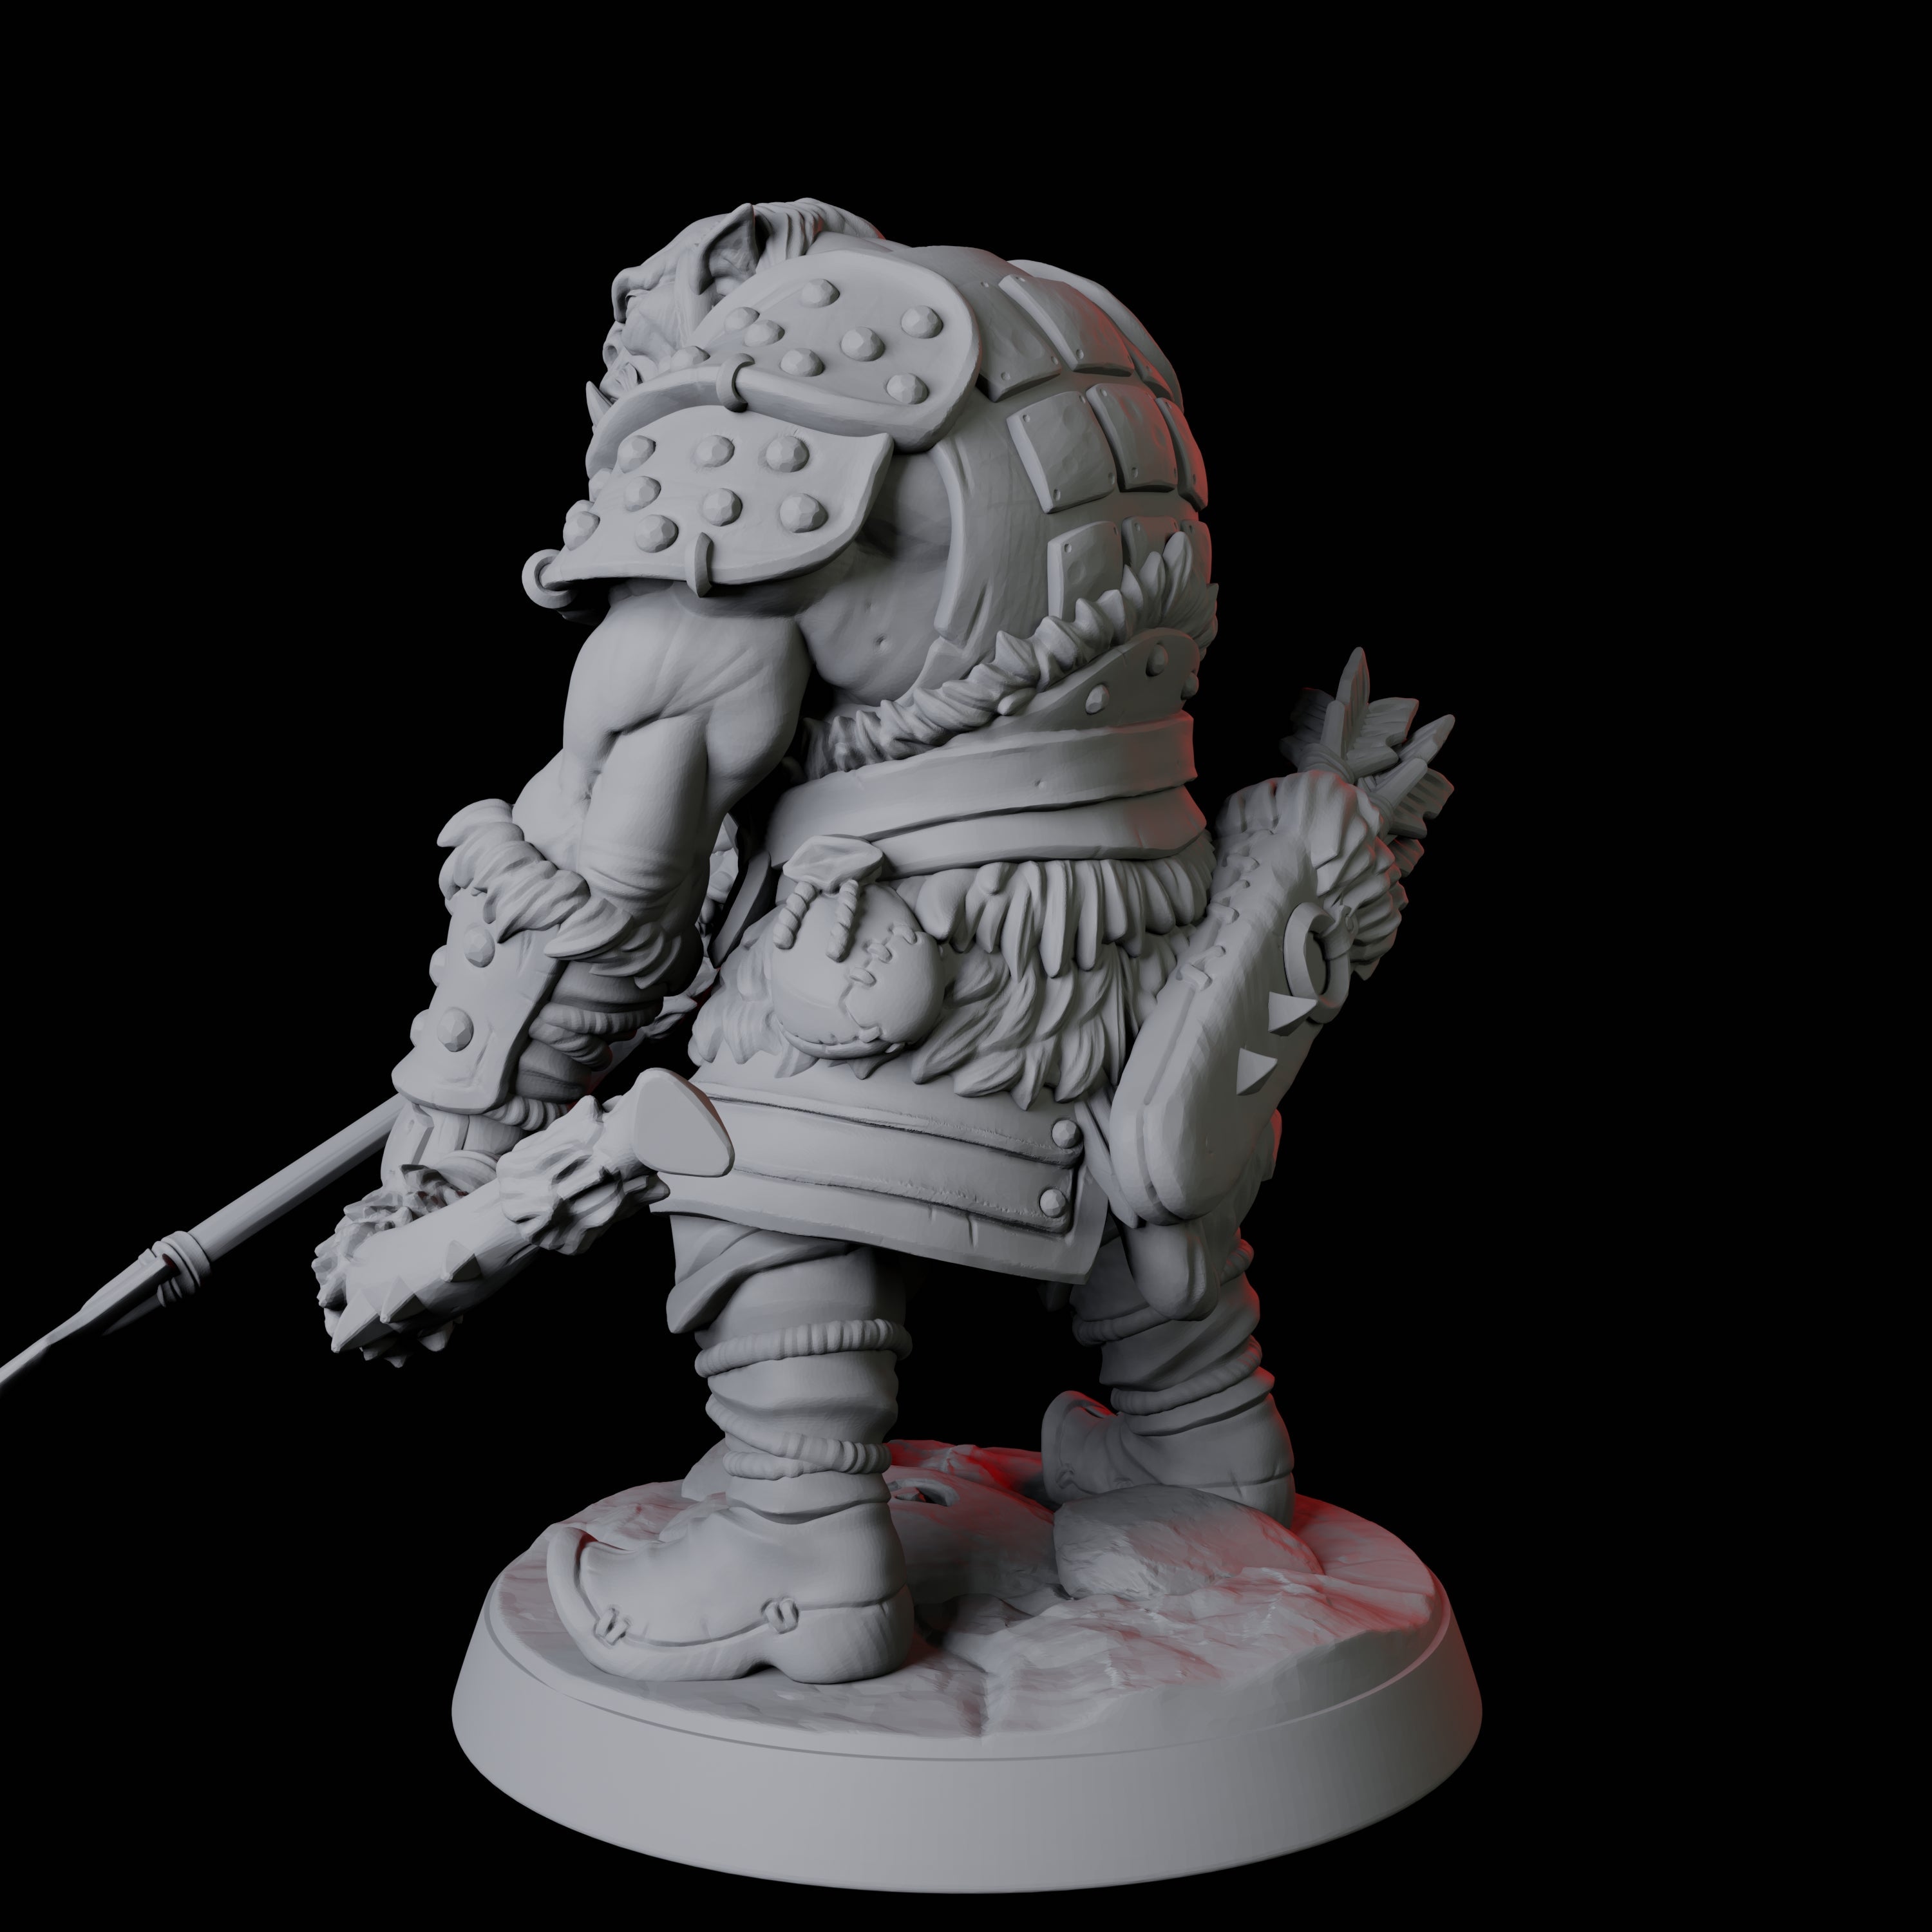 Mountain Orc Warrior B Miniature for Dungeons and Dragons, Pathfinder or other TTRPGs